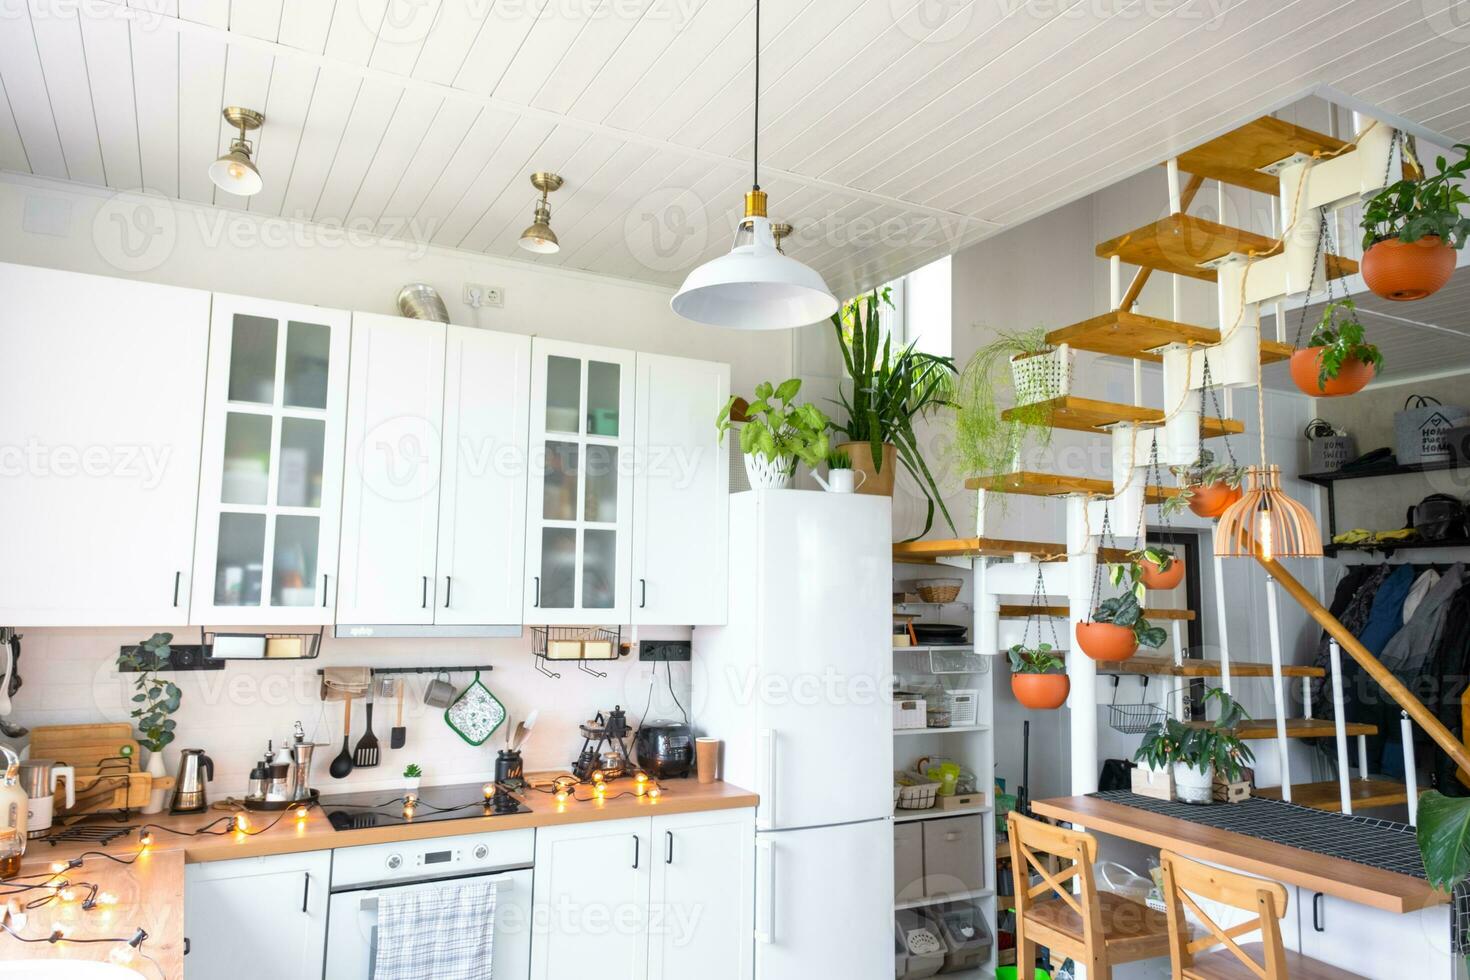 The general plan of a light white modern rustic kitchen with a modular metal staircase decorated with potted plants. Interior of a house with homeplants photo